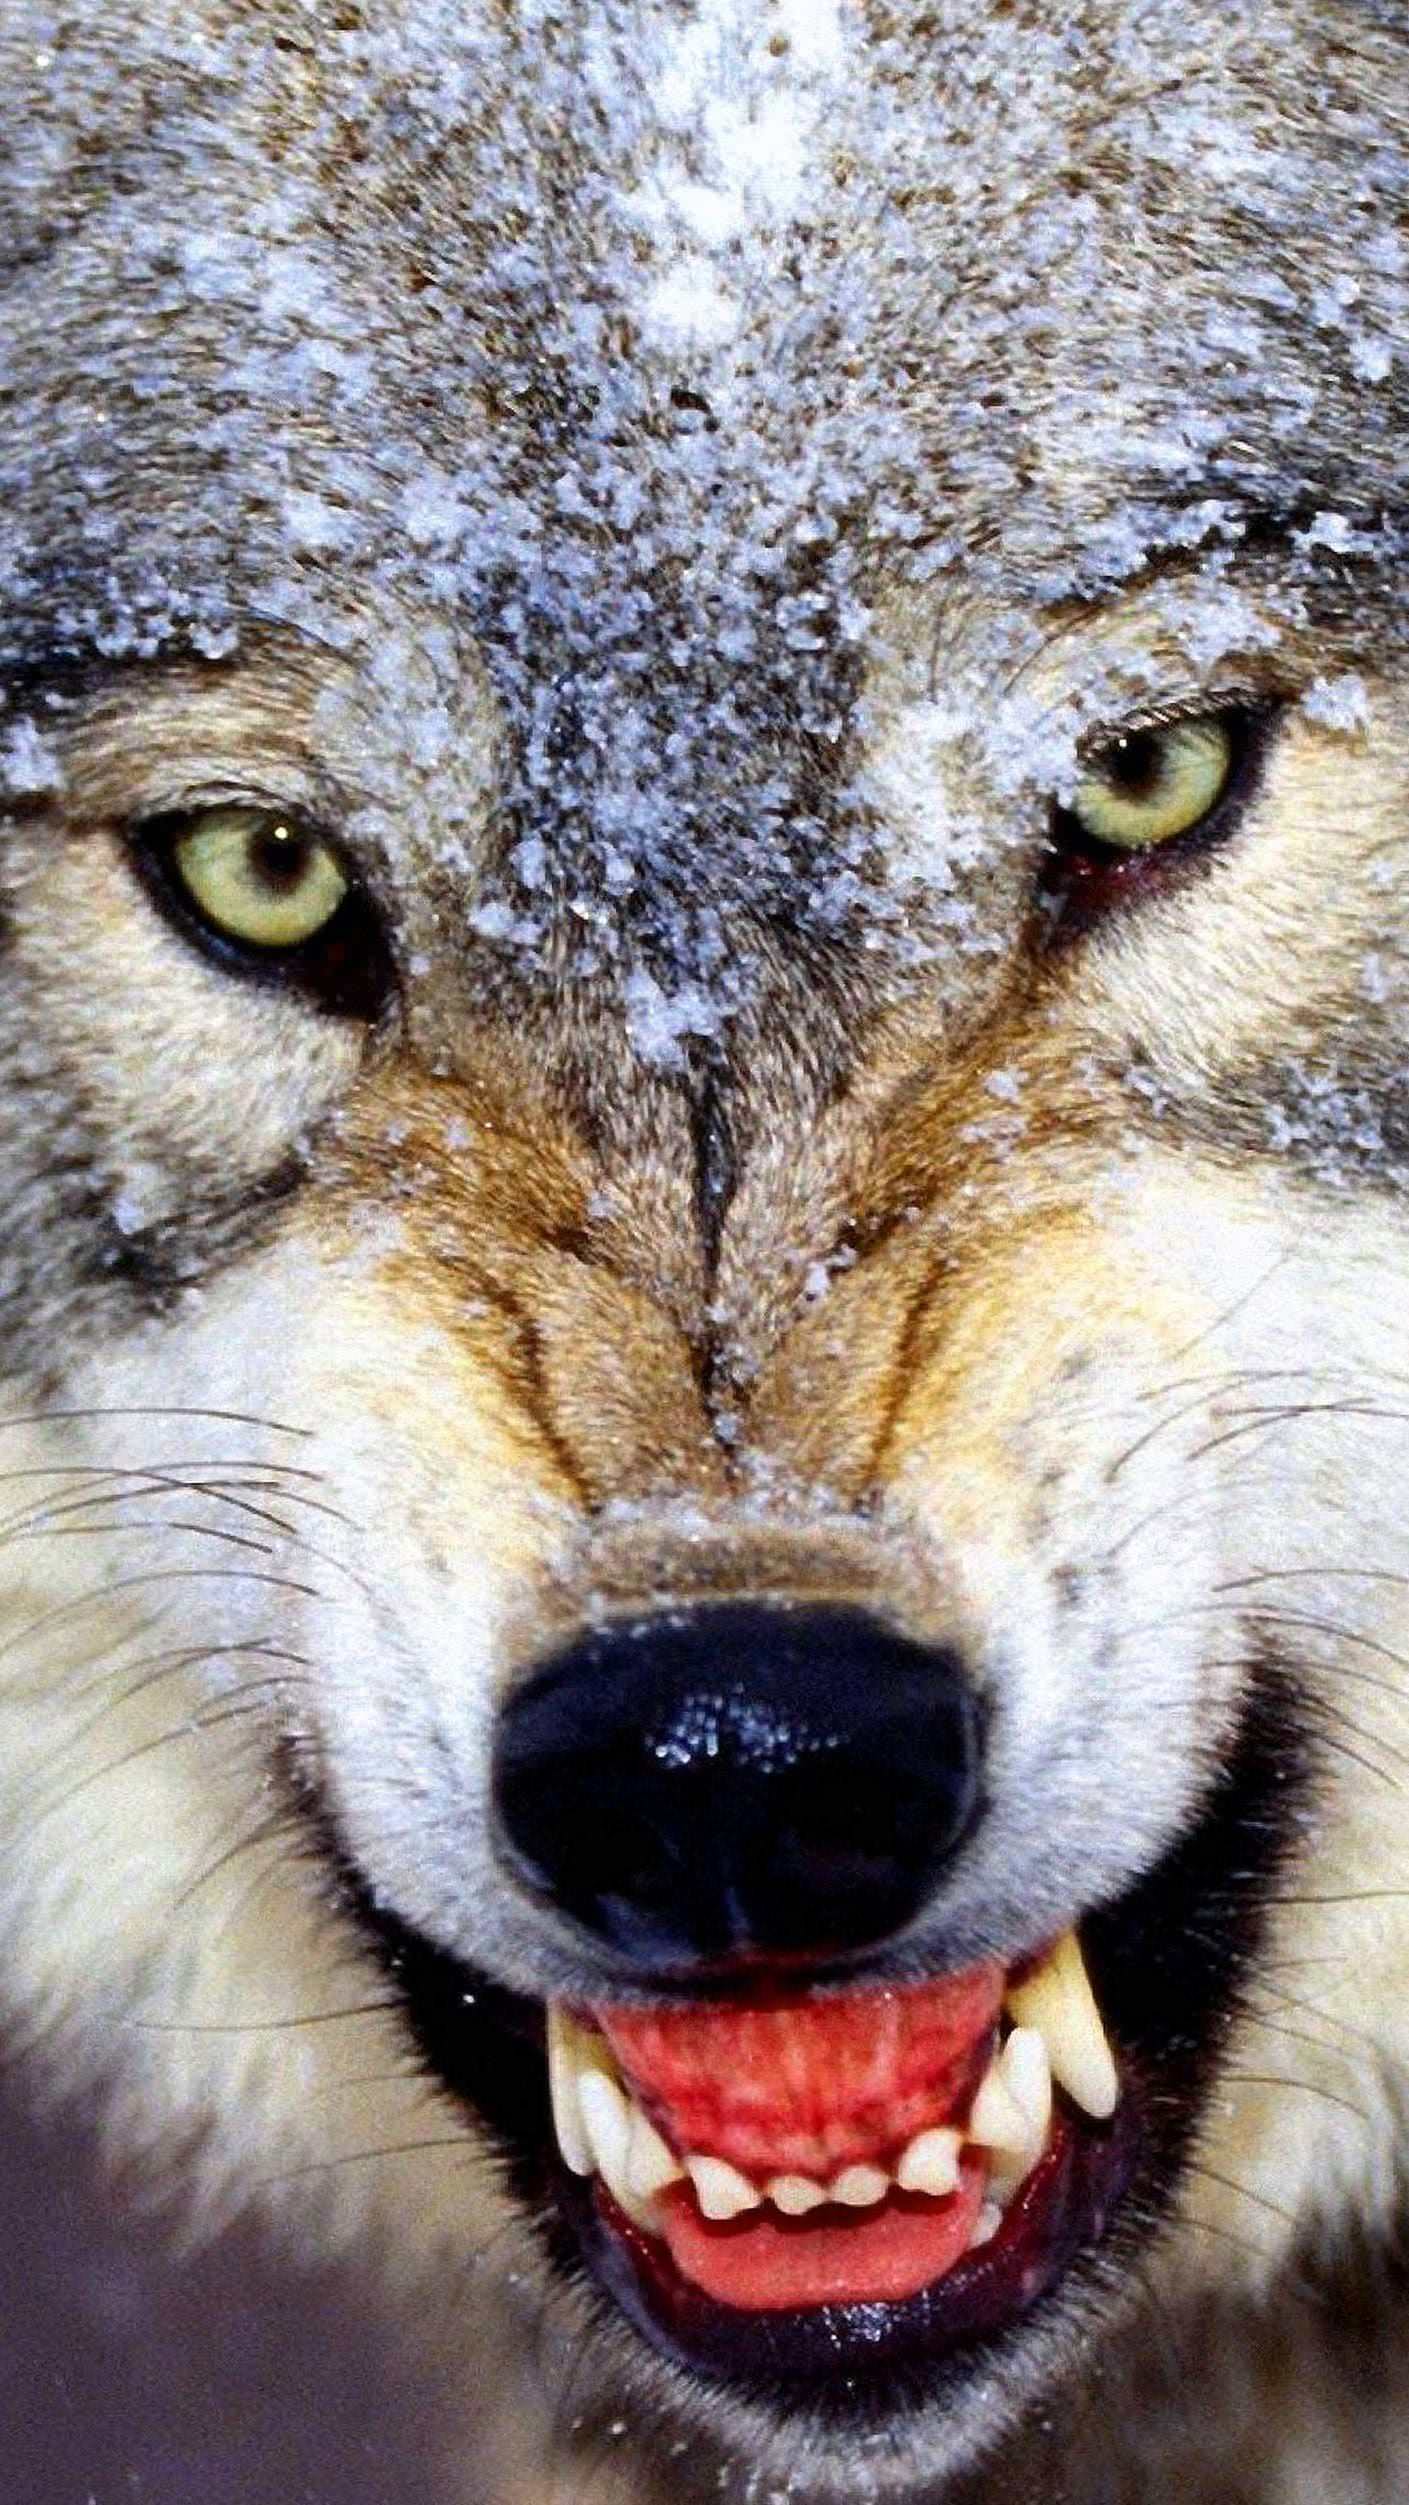 Wolf Mobile HD Wallpapers